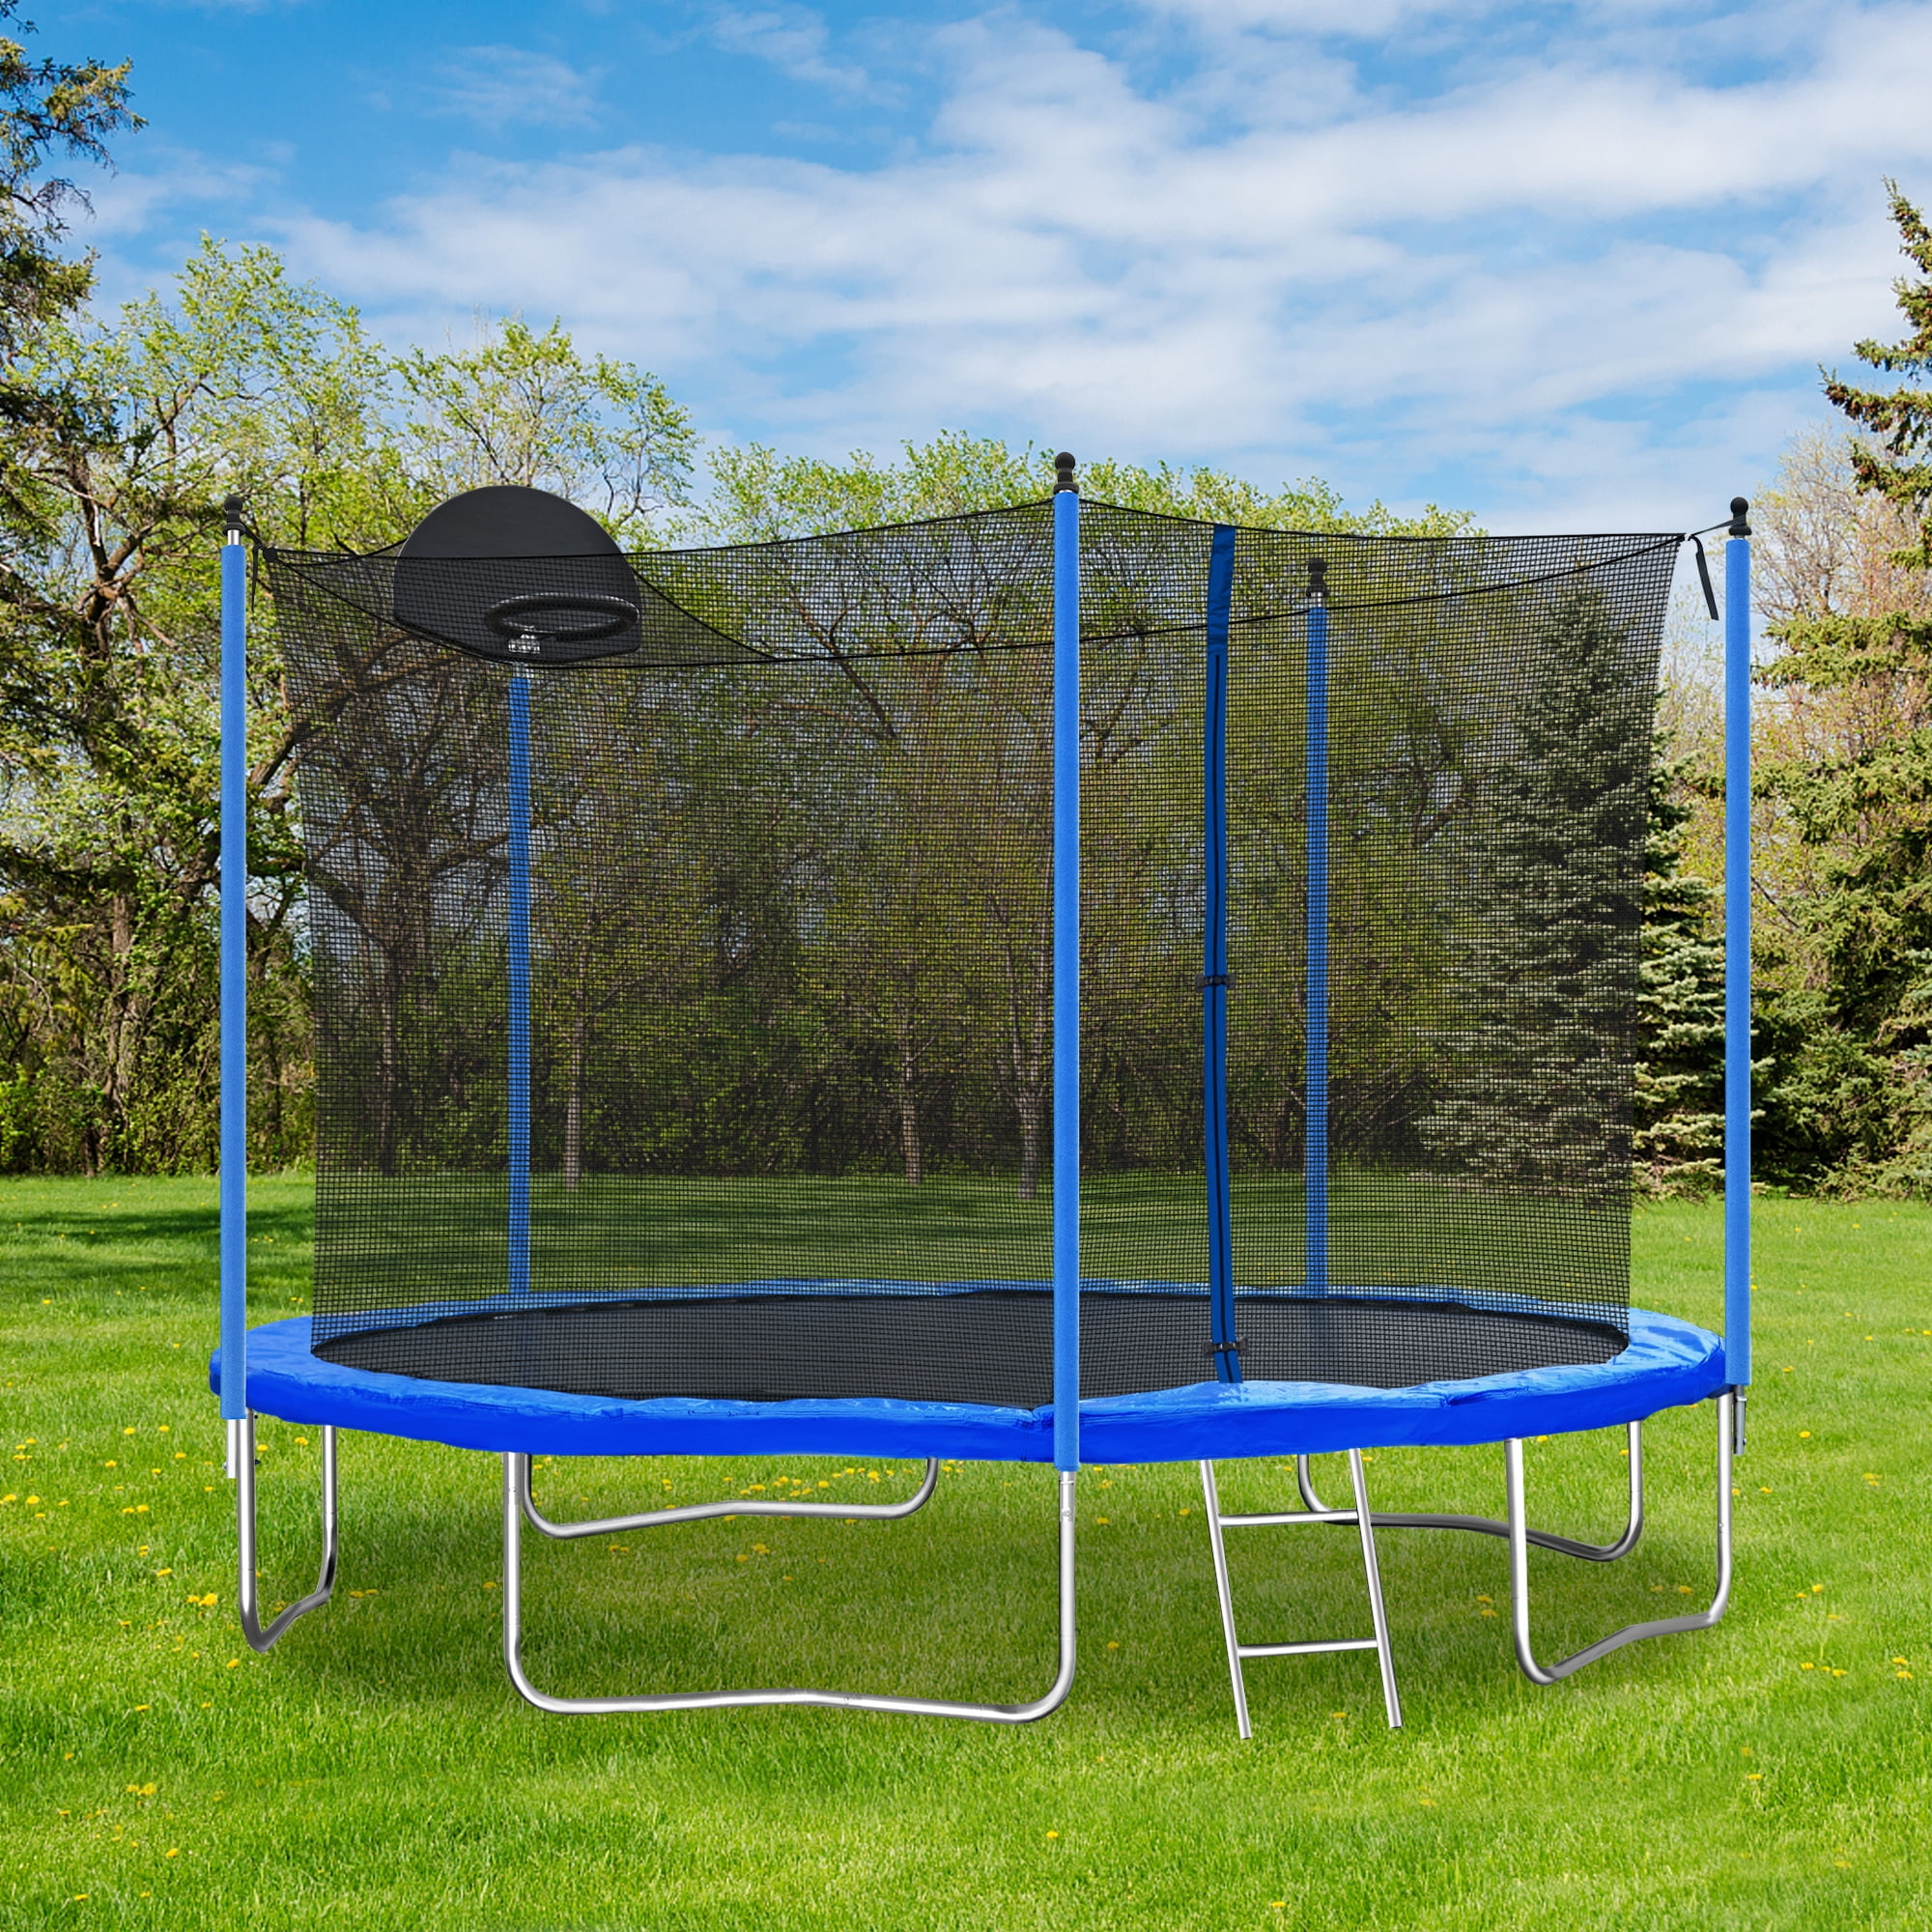 12FT Trampoline with Enclosure, Upgraded Kids Trampoline with Basketball Hoop and Non-slip Ladder, Backyard Patio Family Outdoor Recreational Trampoline, Including All Accessories -